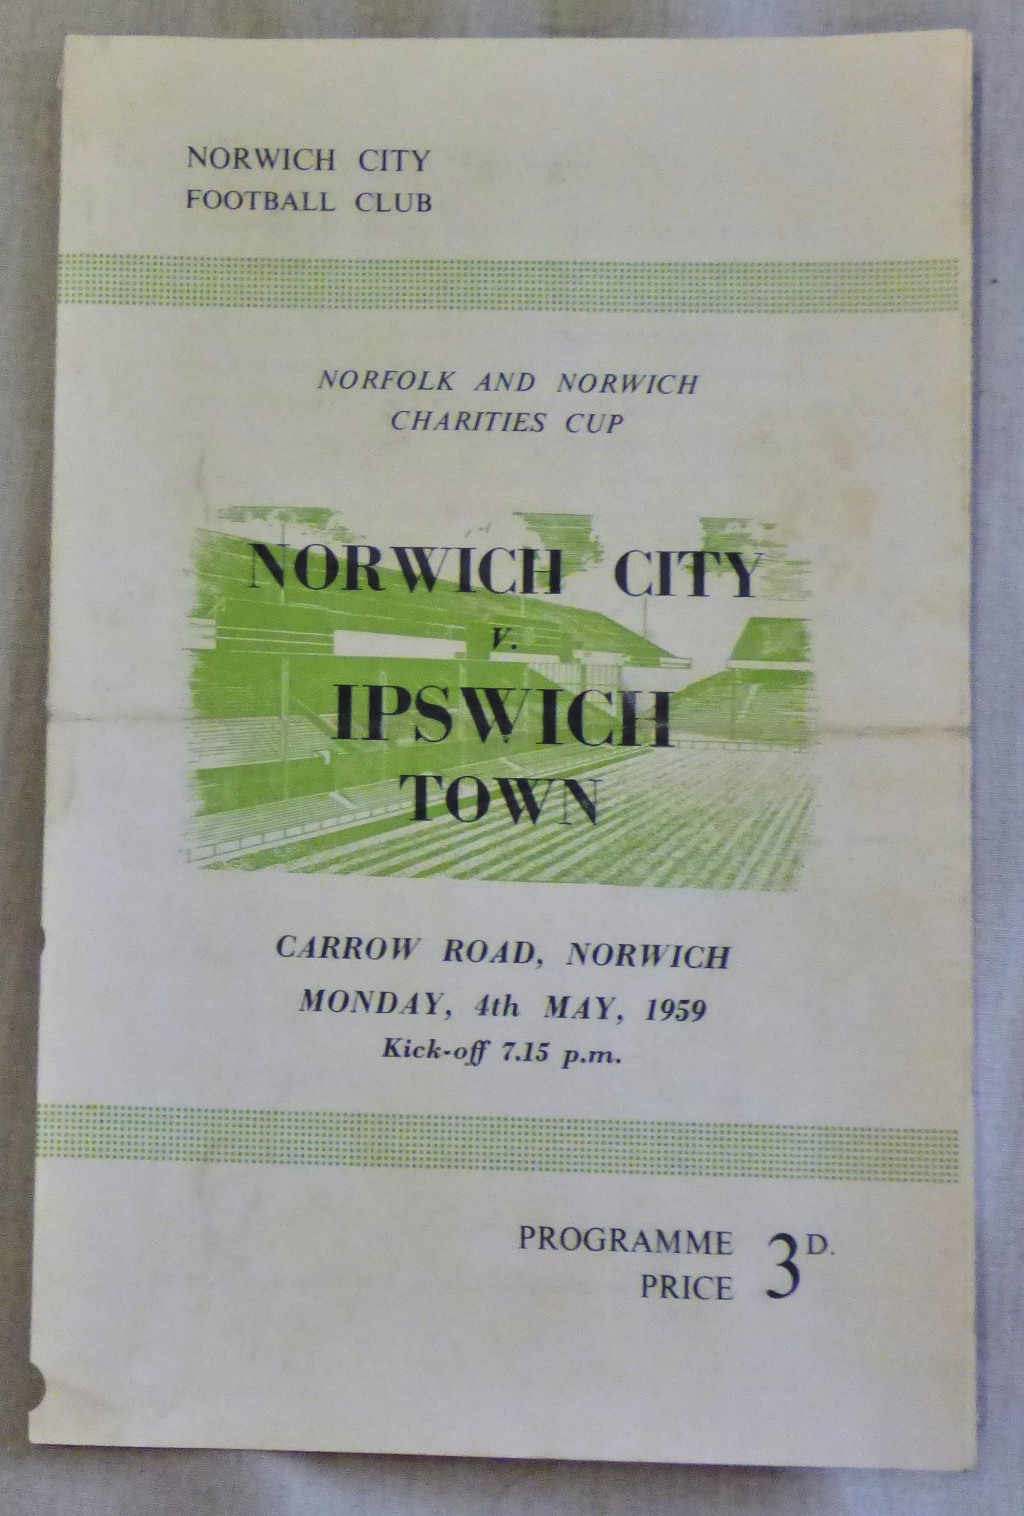 Norfolk and Norwich Charities Cup Norwich City v Ipswich Town 1959